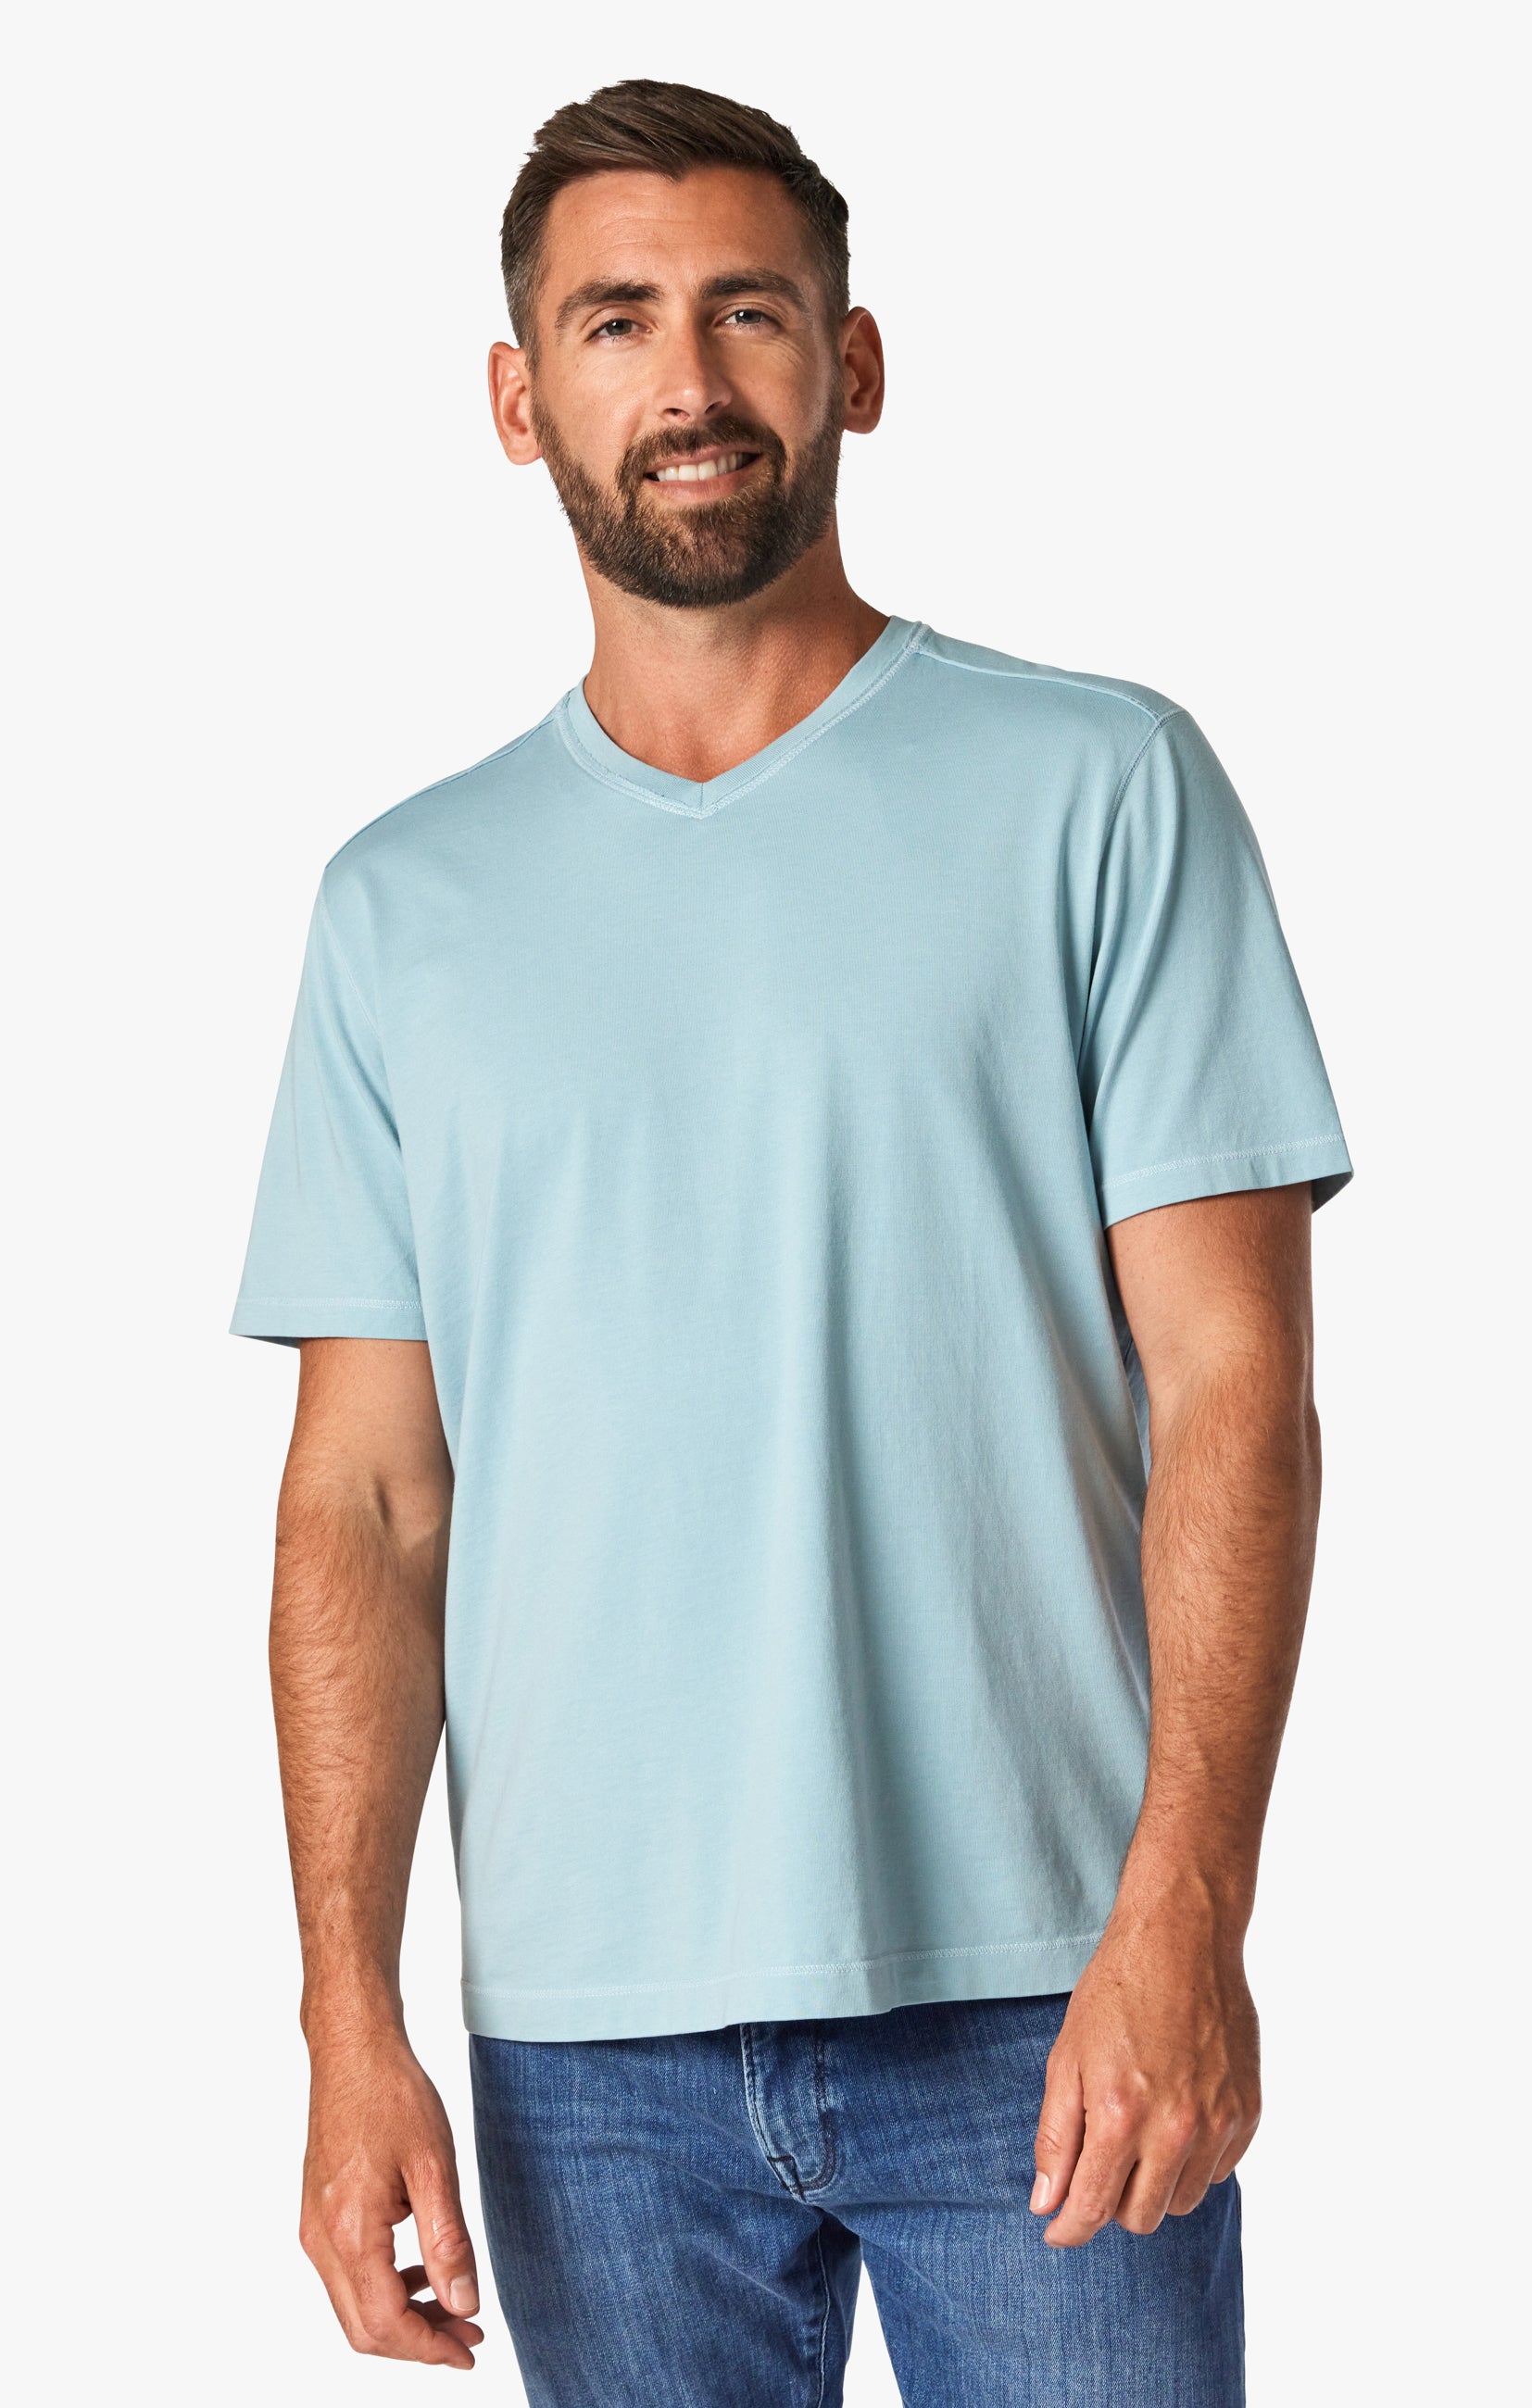 Deconstructed V-Neck T-Shirt in Forget-Me-Not Image 1